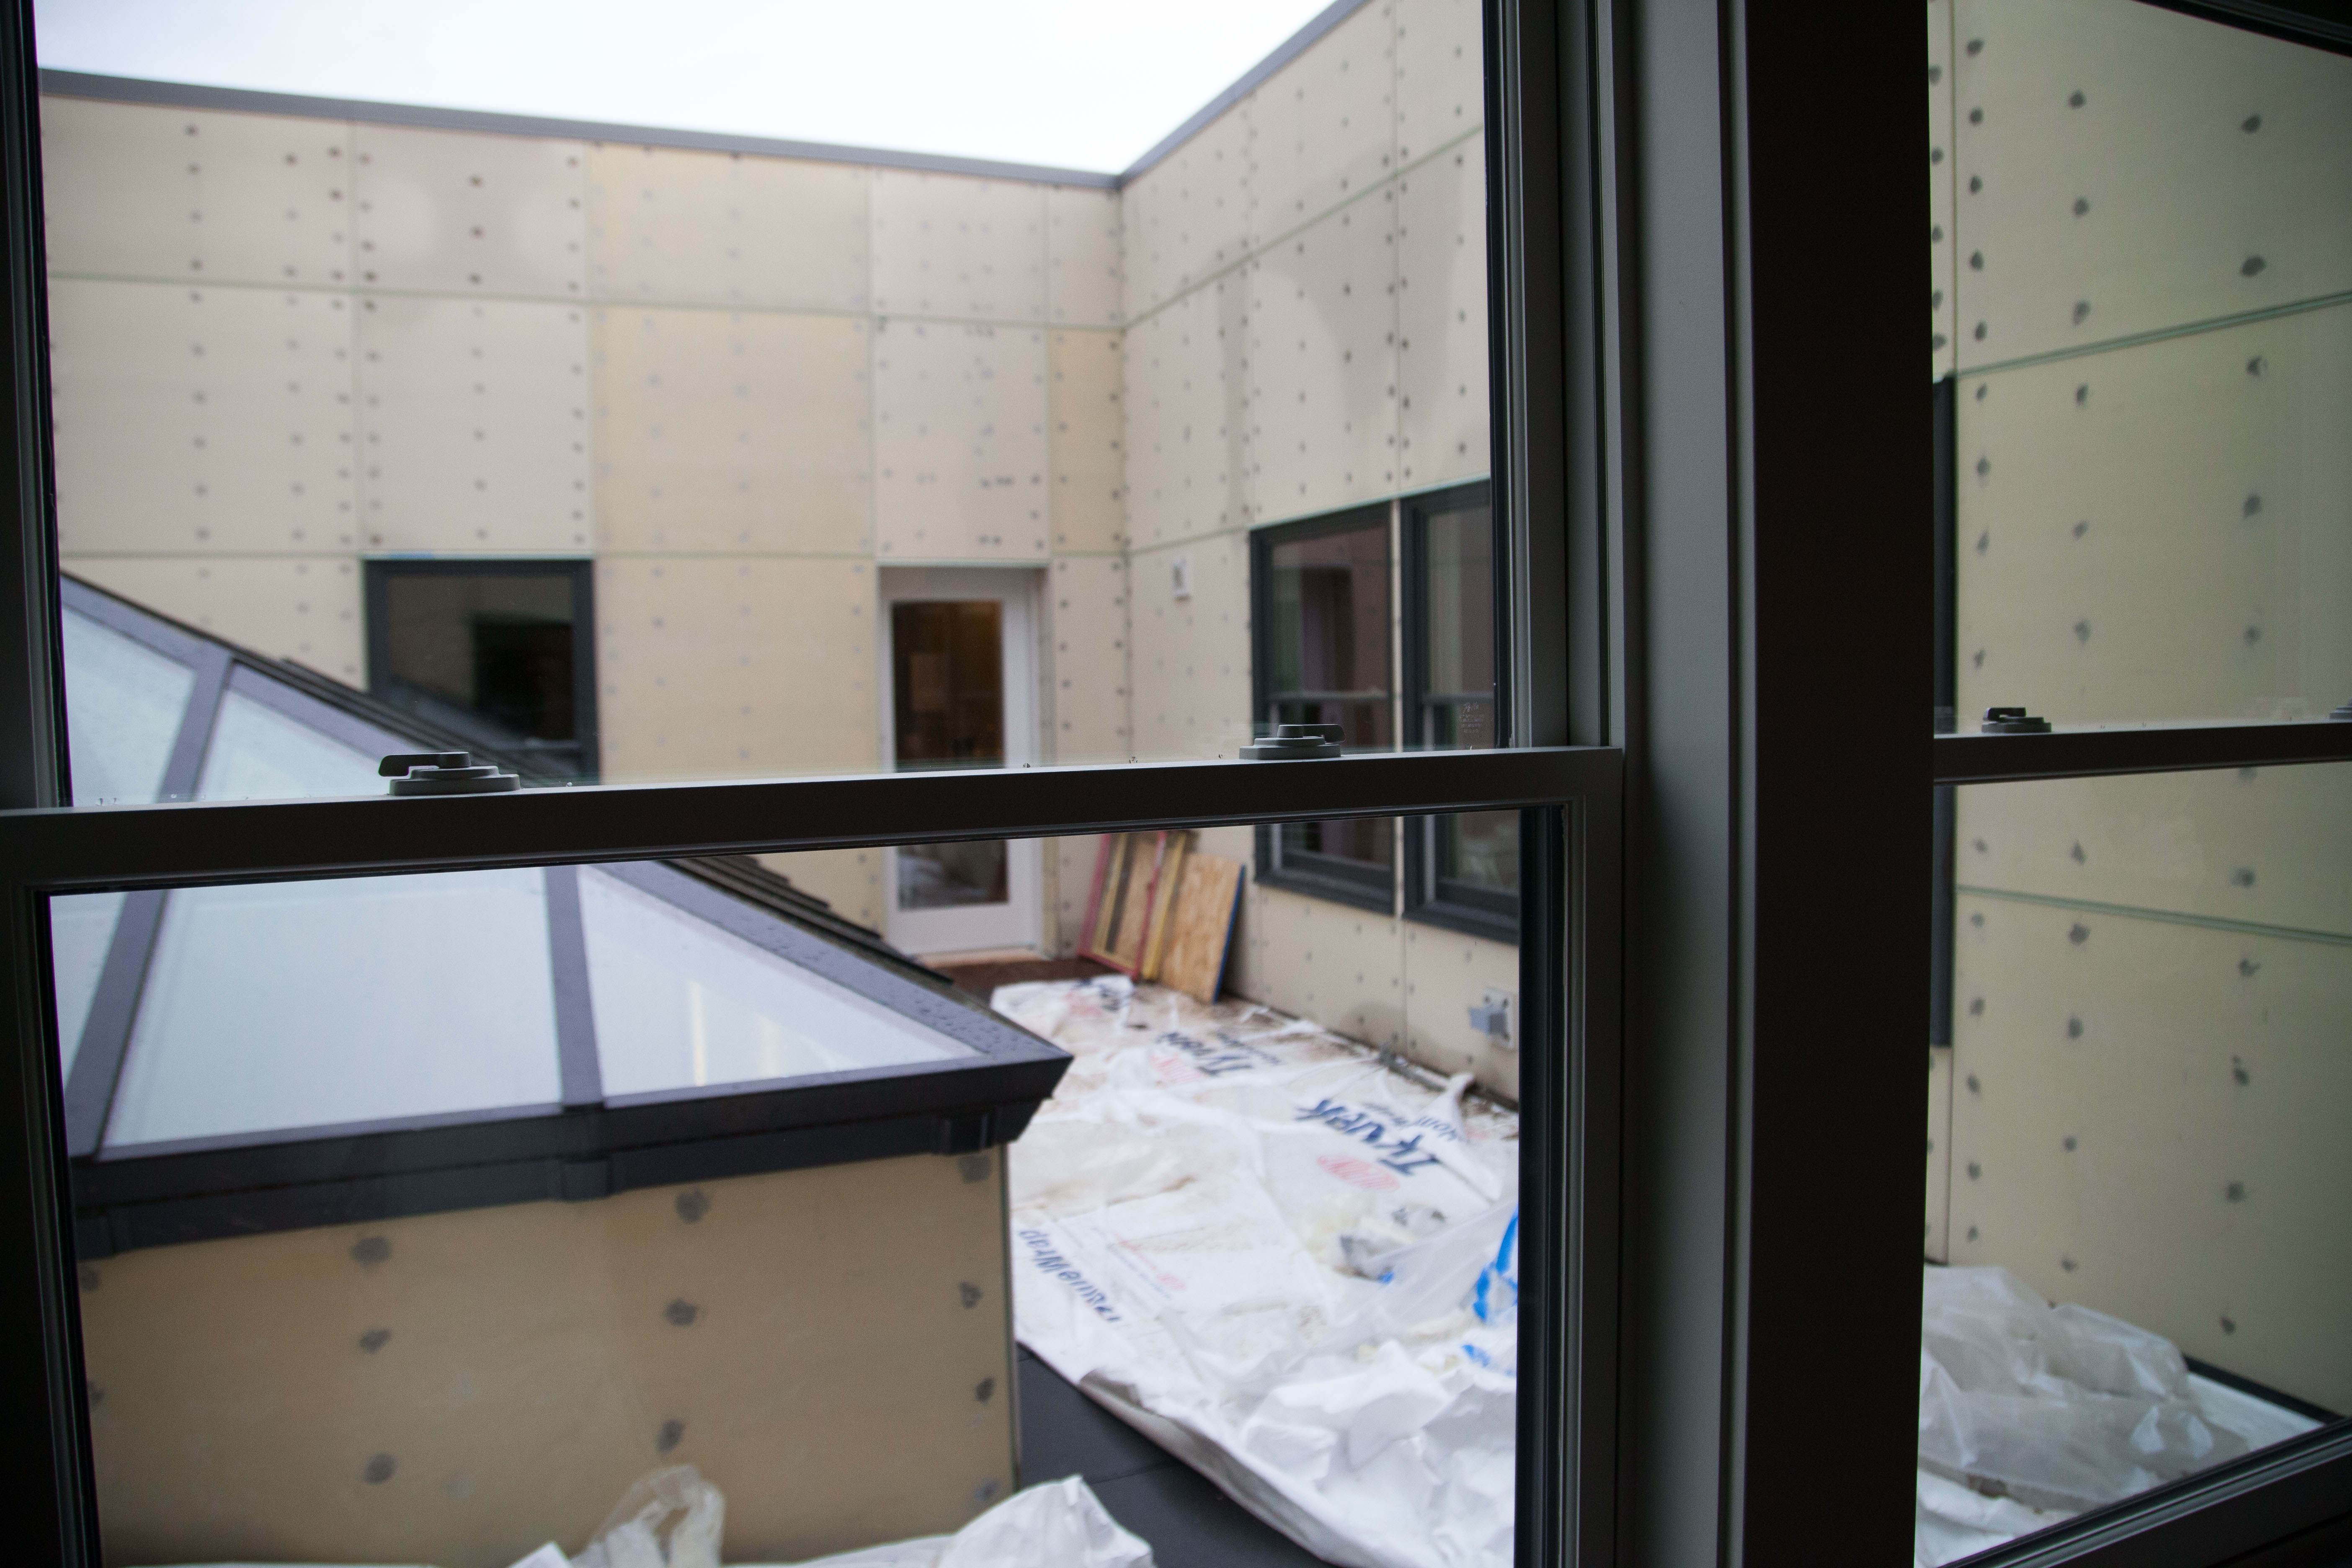 Inn at Lynden's "skywell", awaiting final touches, will feature a patio and allows natural light.